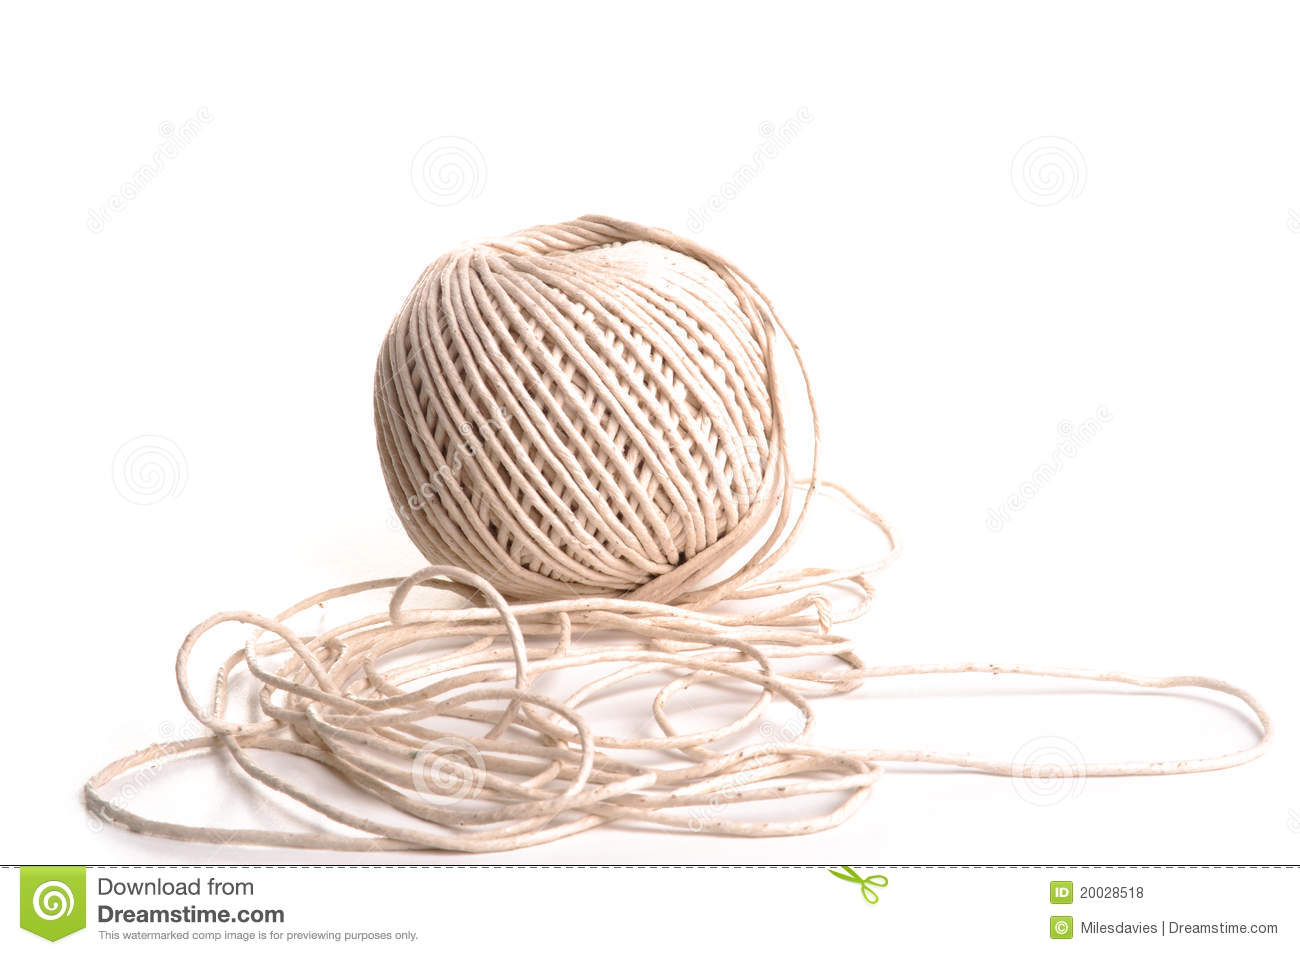 Photograph Of A Ball Of String Shot In Studio And Isolated On A White